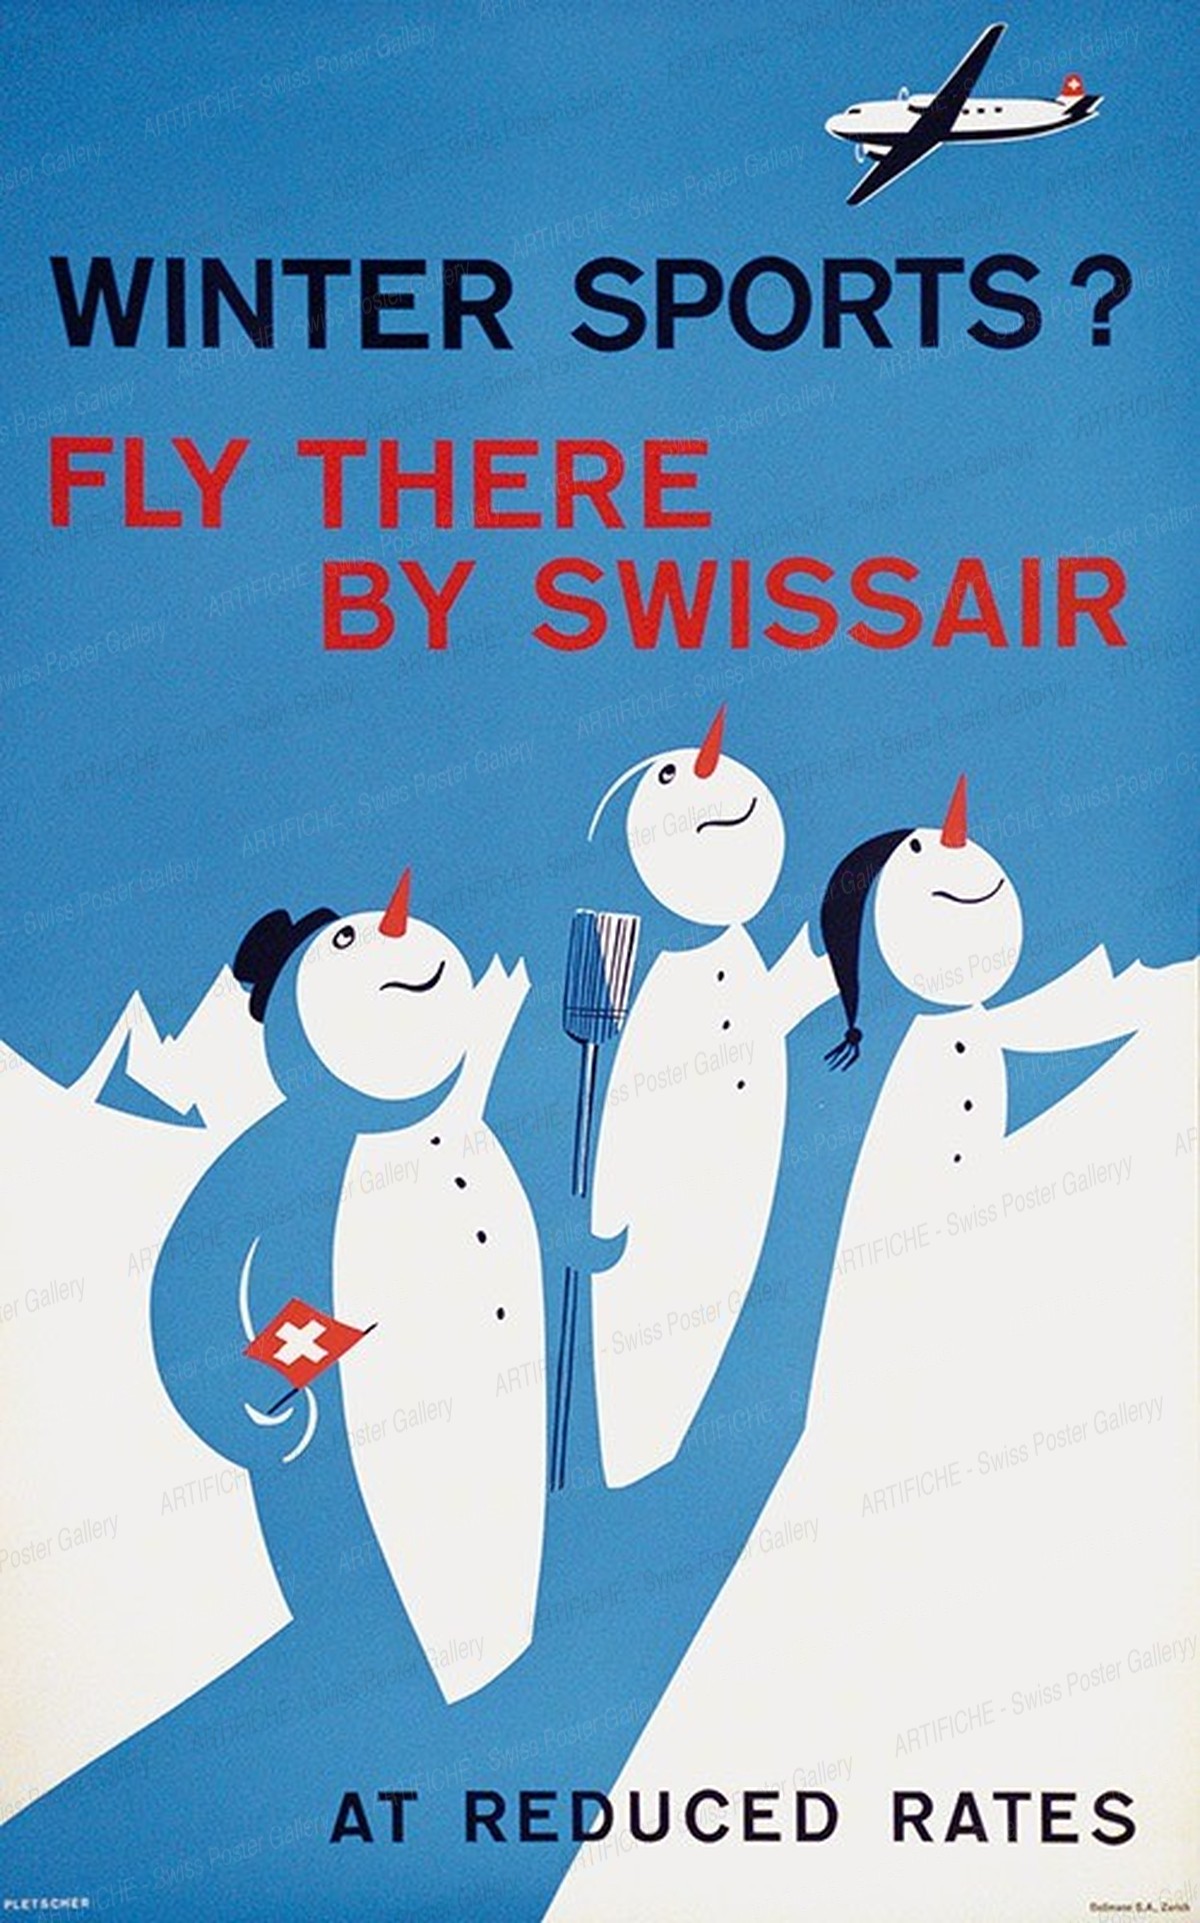 Winter Sports ? Fly there by Swissair – at reduced rates, Fredy Pletscher